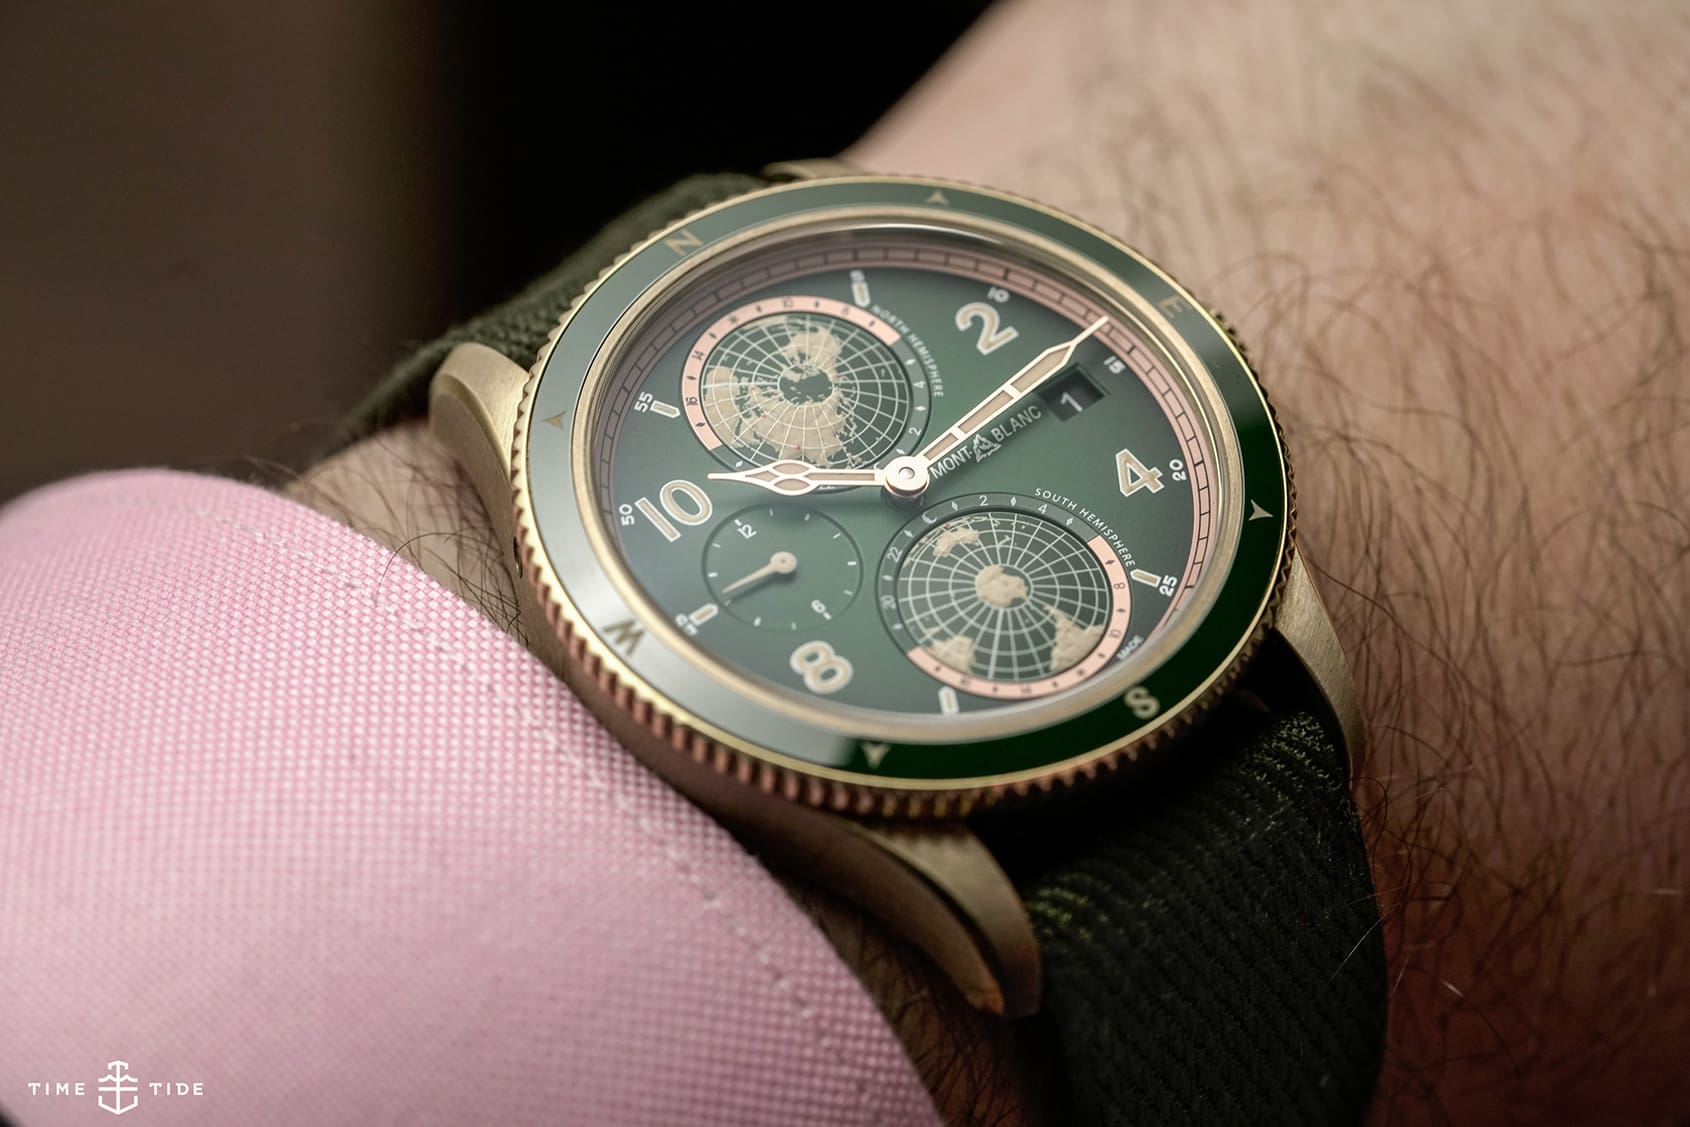 VIDEO: 5 outstanding Montblanc watches from SIHH 2019